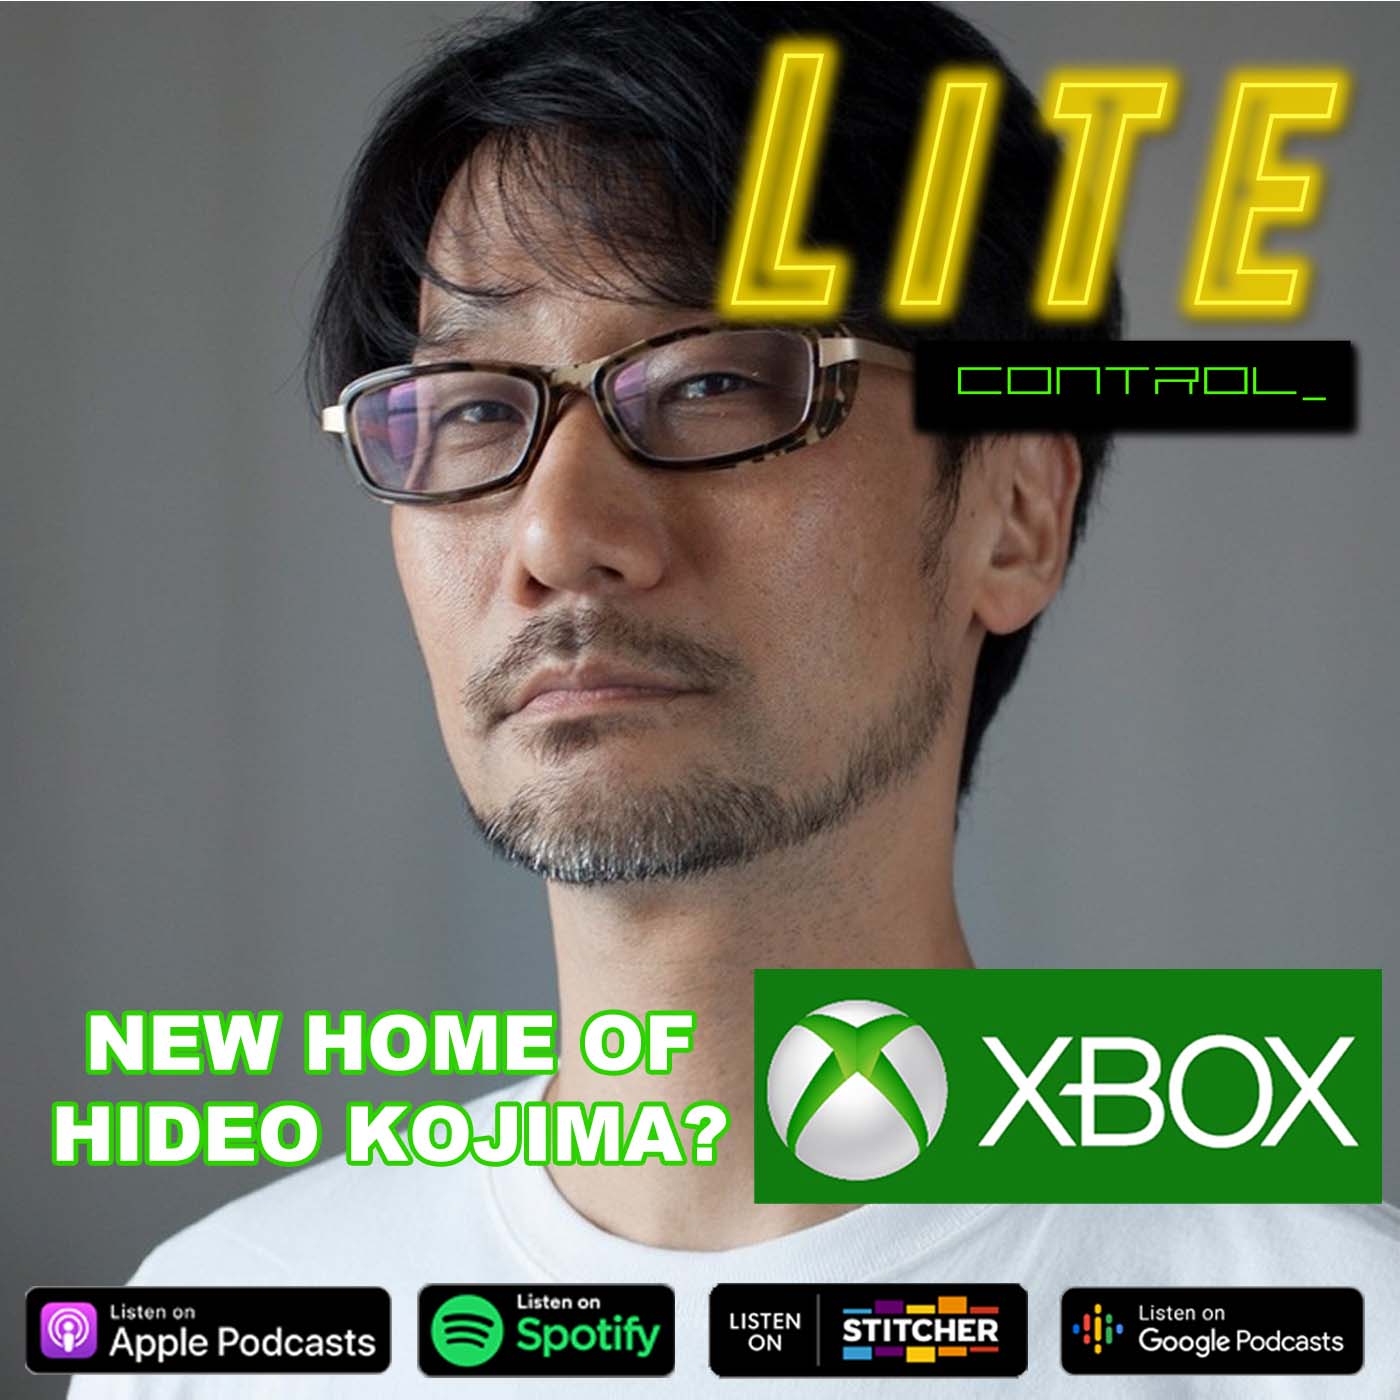 Lite Control 17.84 - Sony Allegedly Passed On Hideo Kojima’s Next Game Before Microsoft Discussions Began.mp3